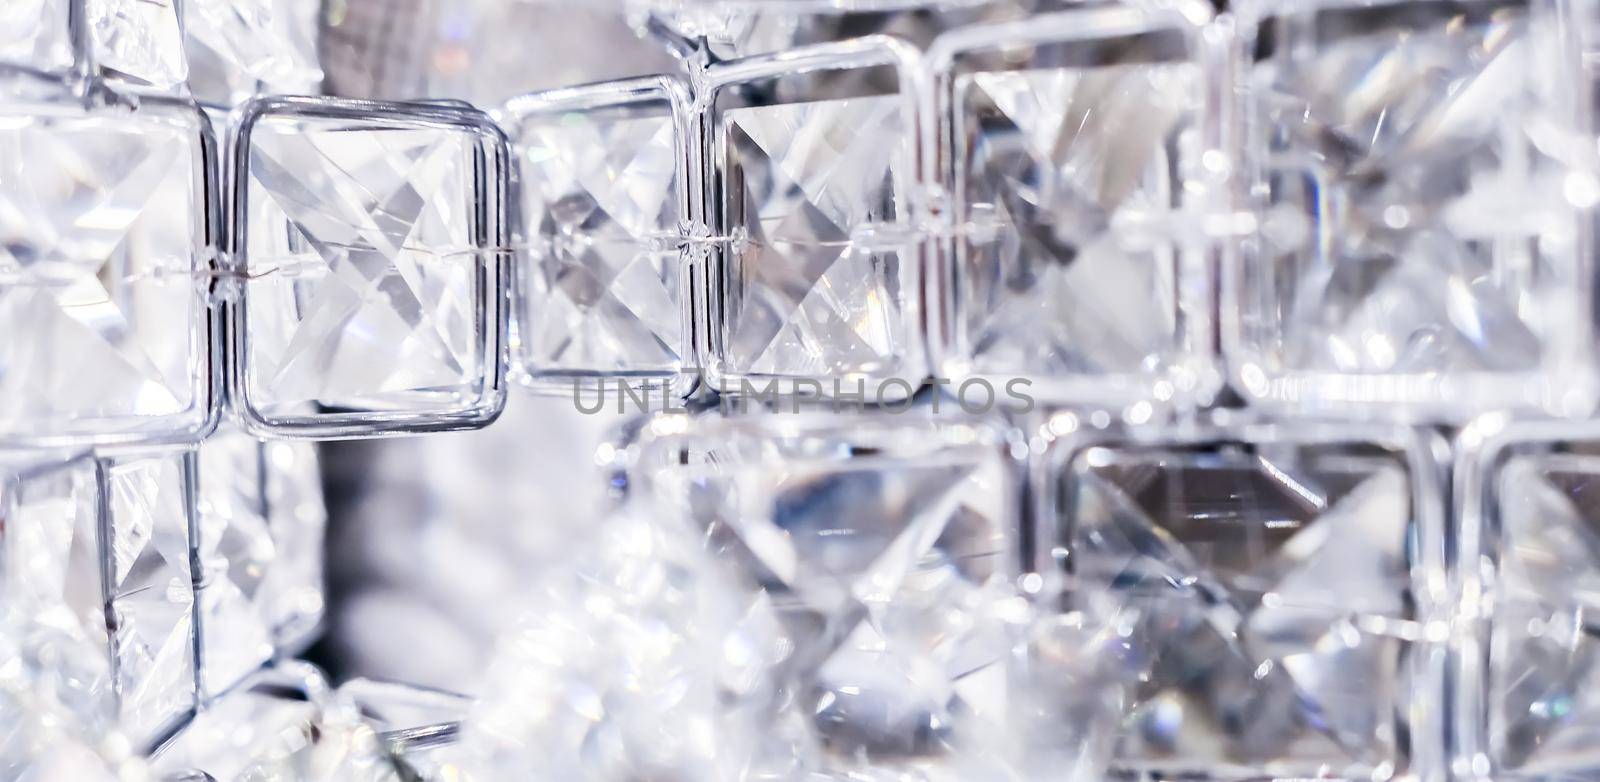 Gemstone, jewellery design and luxurious shopping concept - Diamonds and crystals, luxury textured background